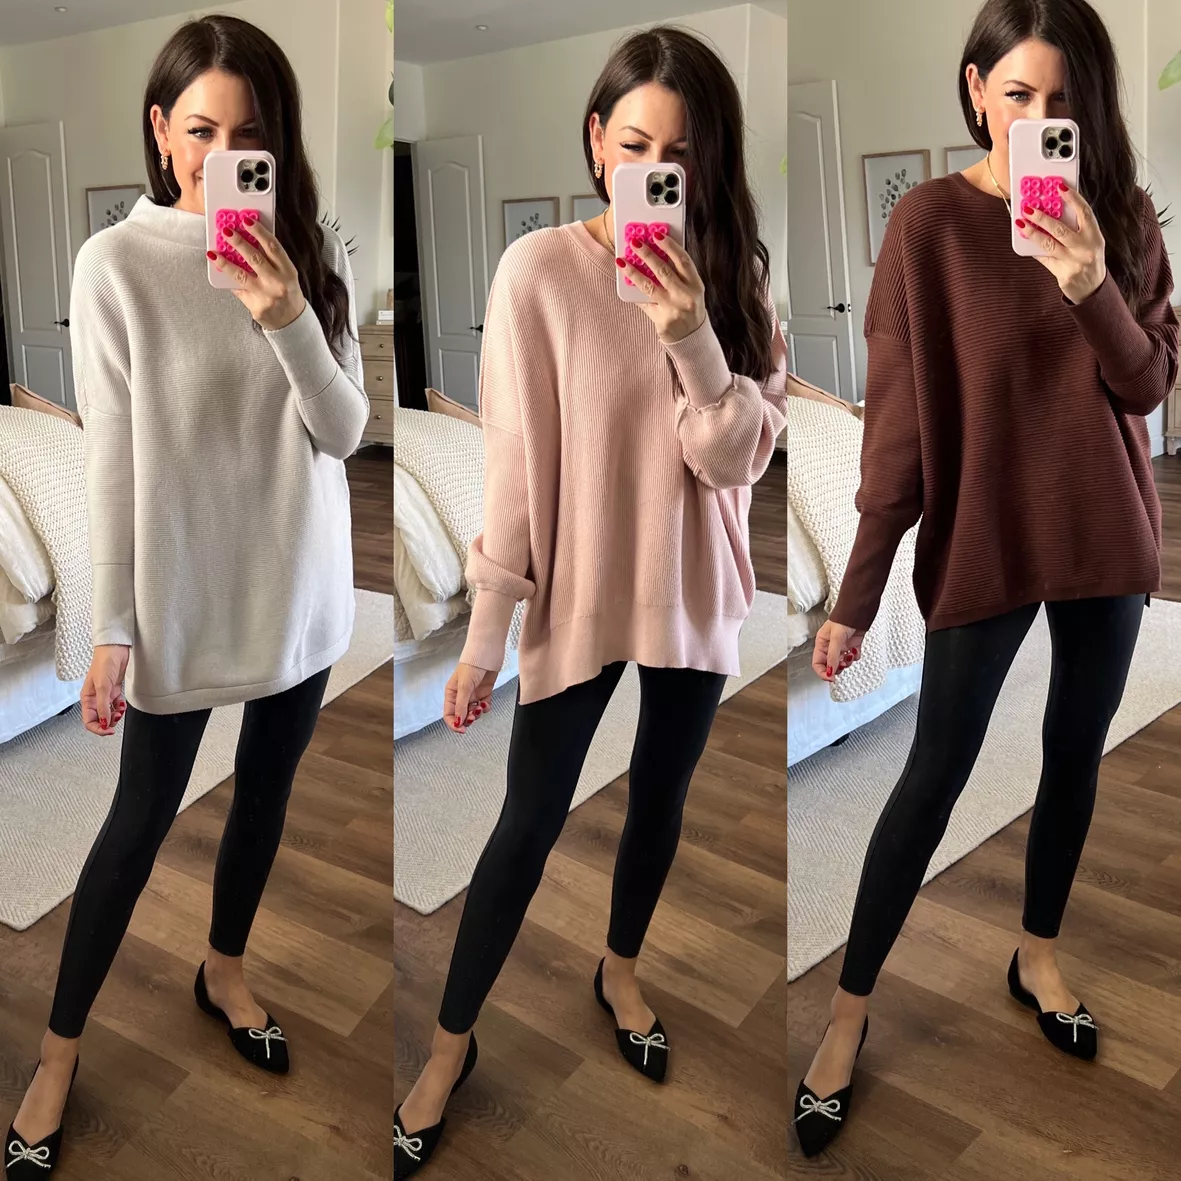 Sweater tunic  Sweaters and leggings, Outfits with leggings, Clothes